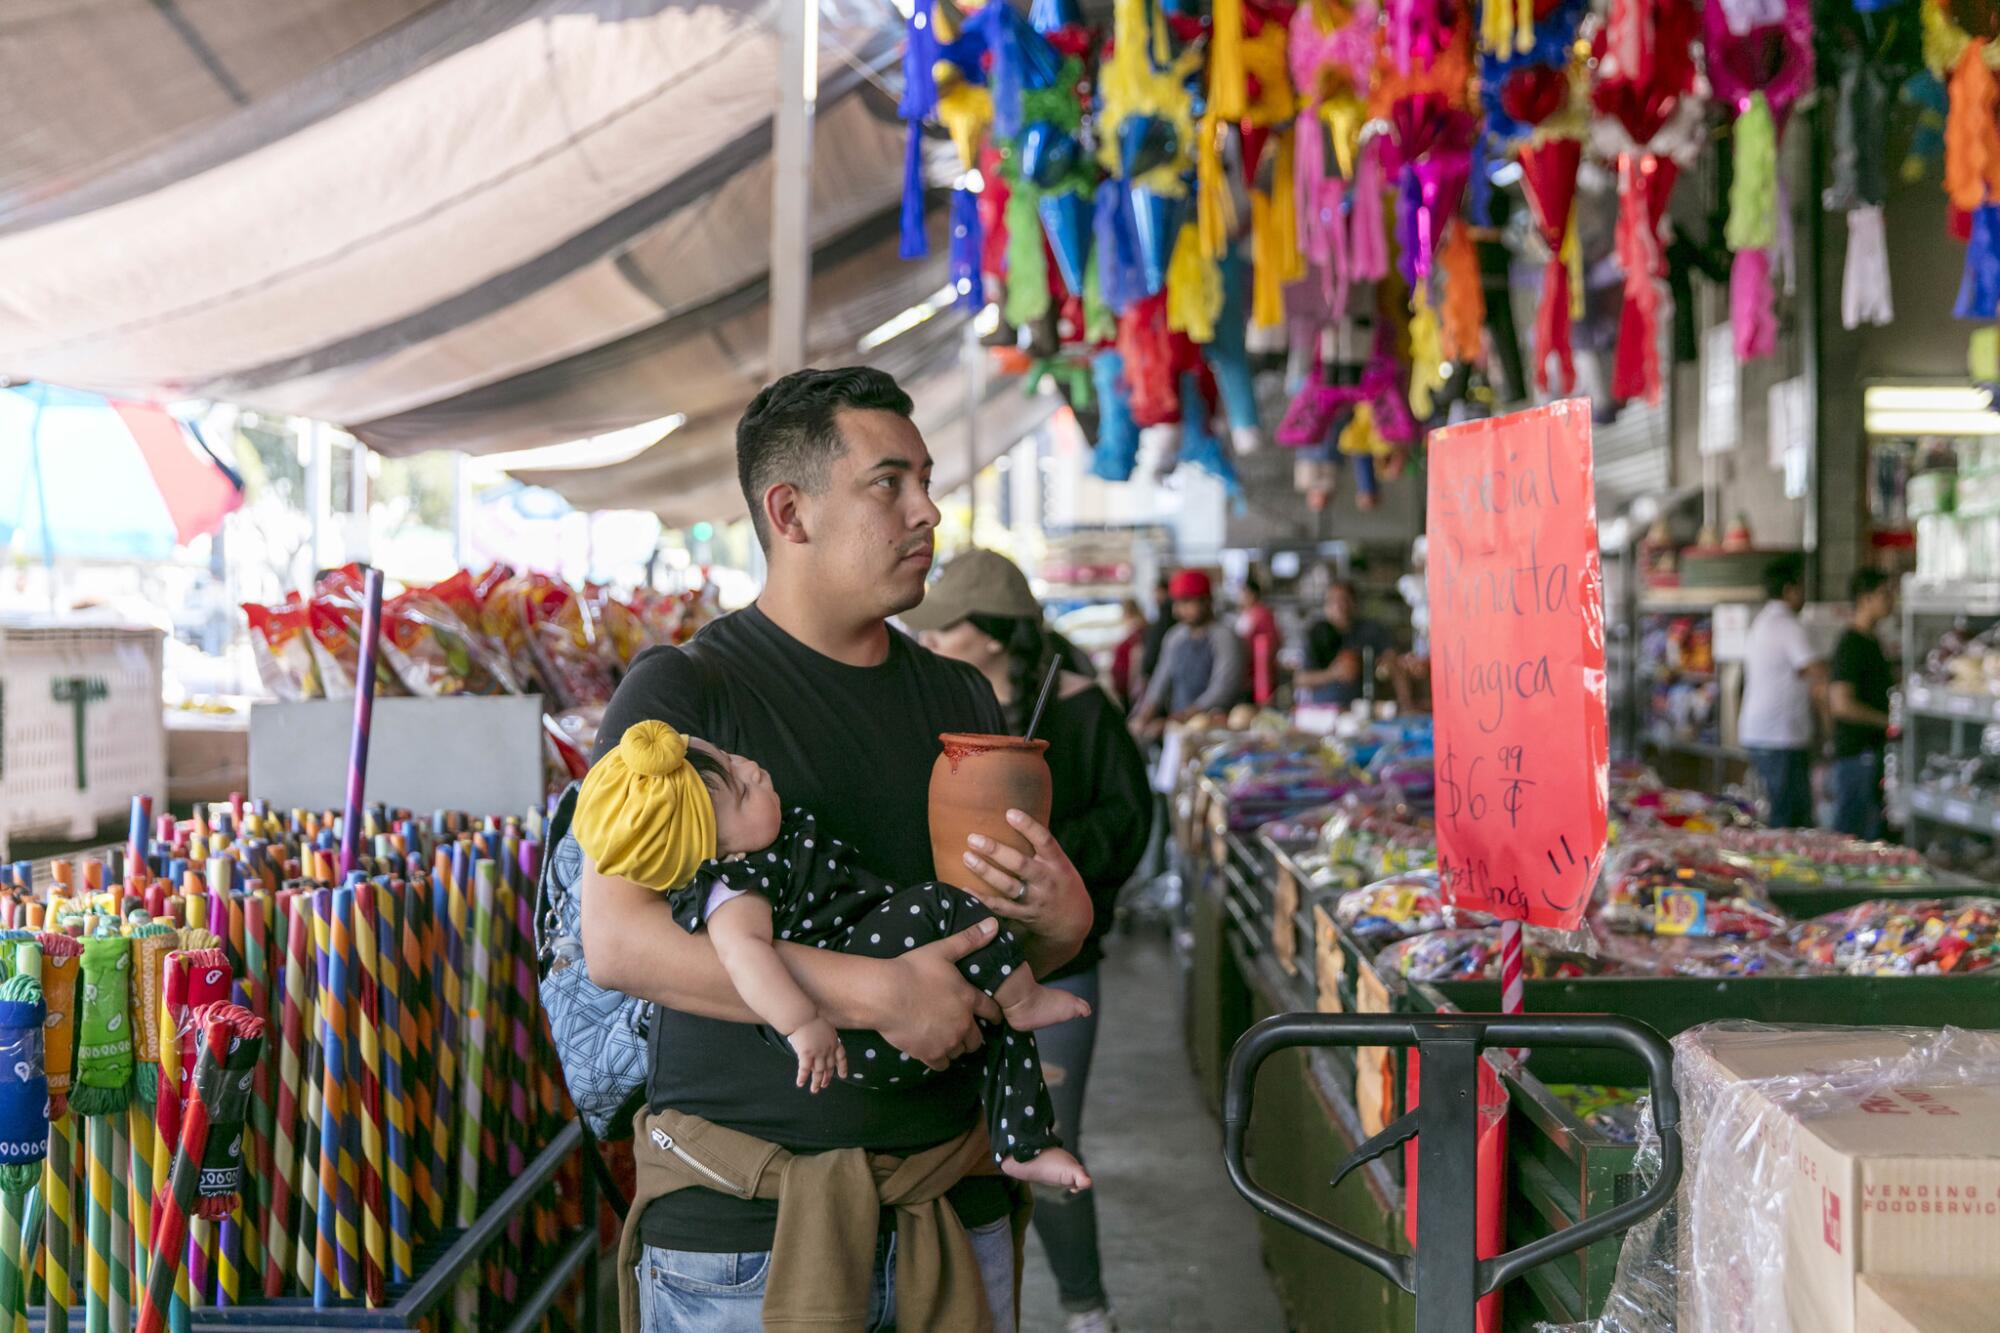 Francisco Martinez and his 4-month-old daughter, Andrea, in the Piñata District in downtown Los Angeles.